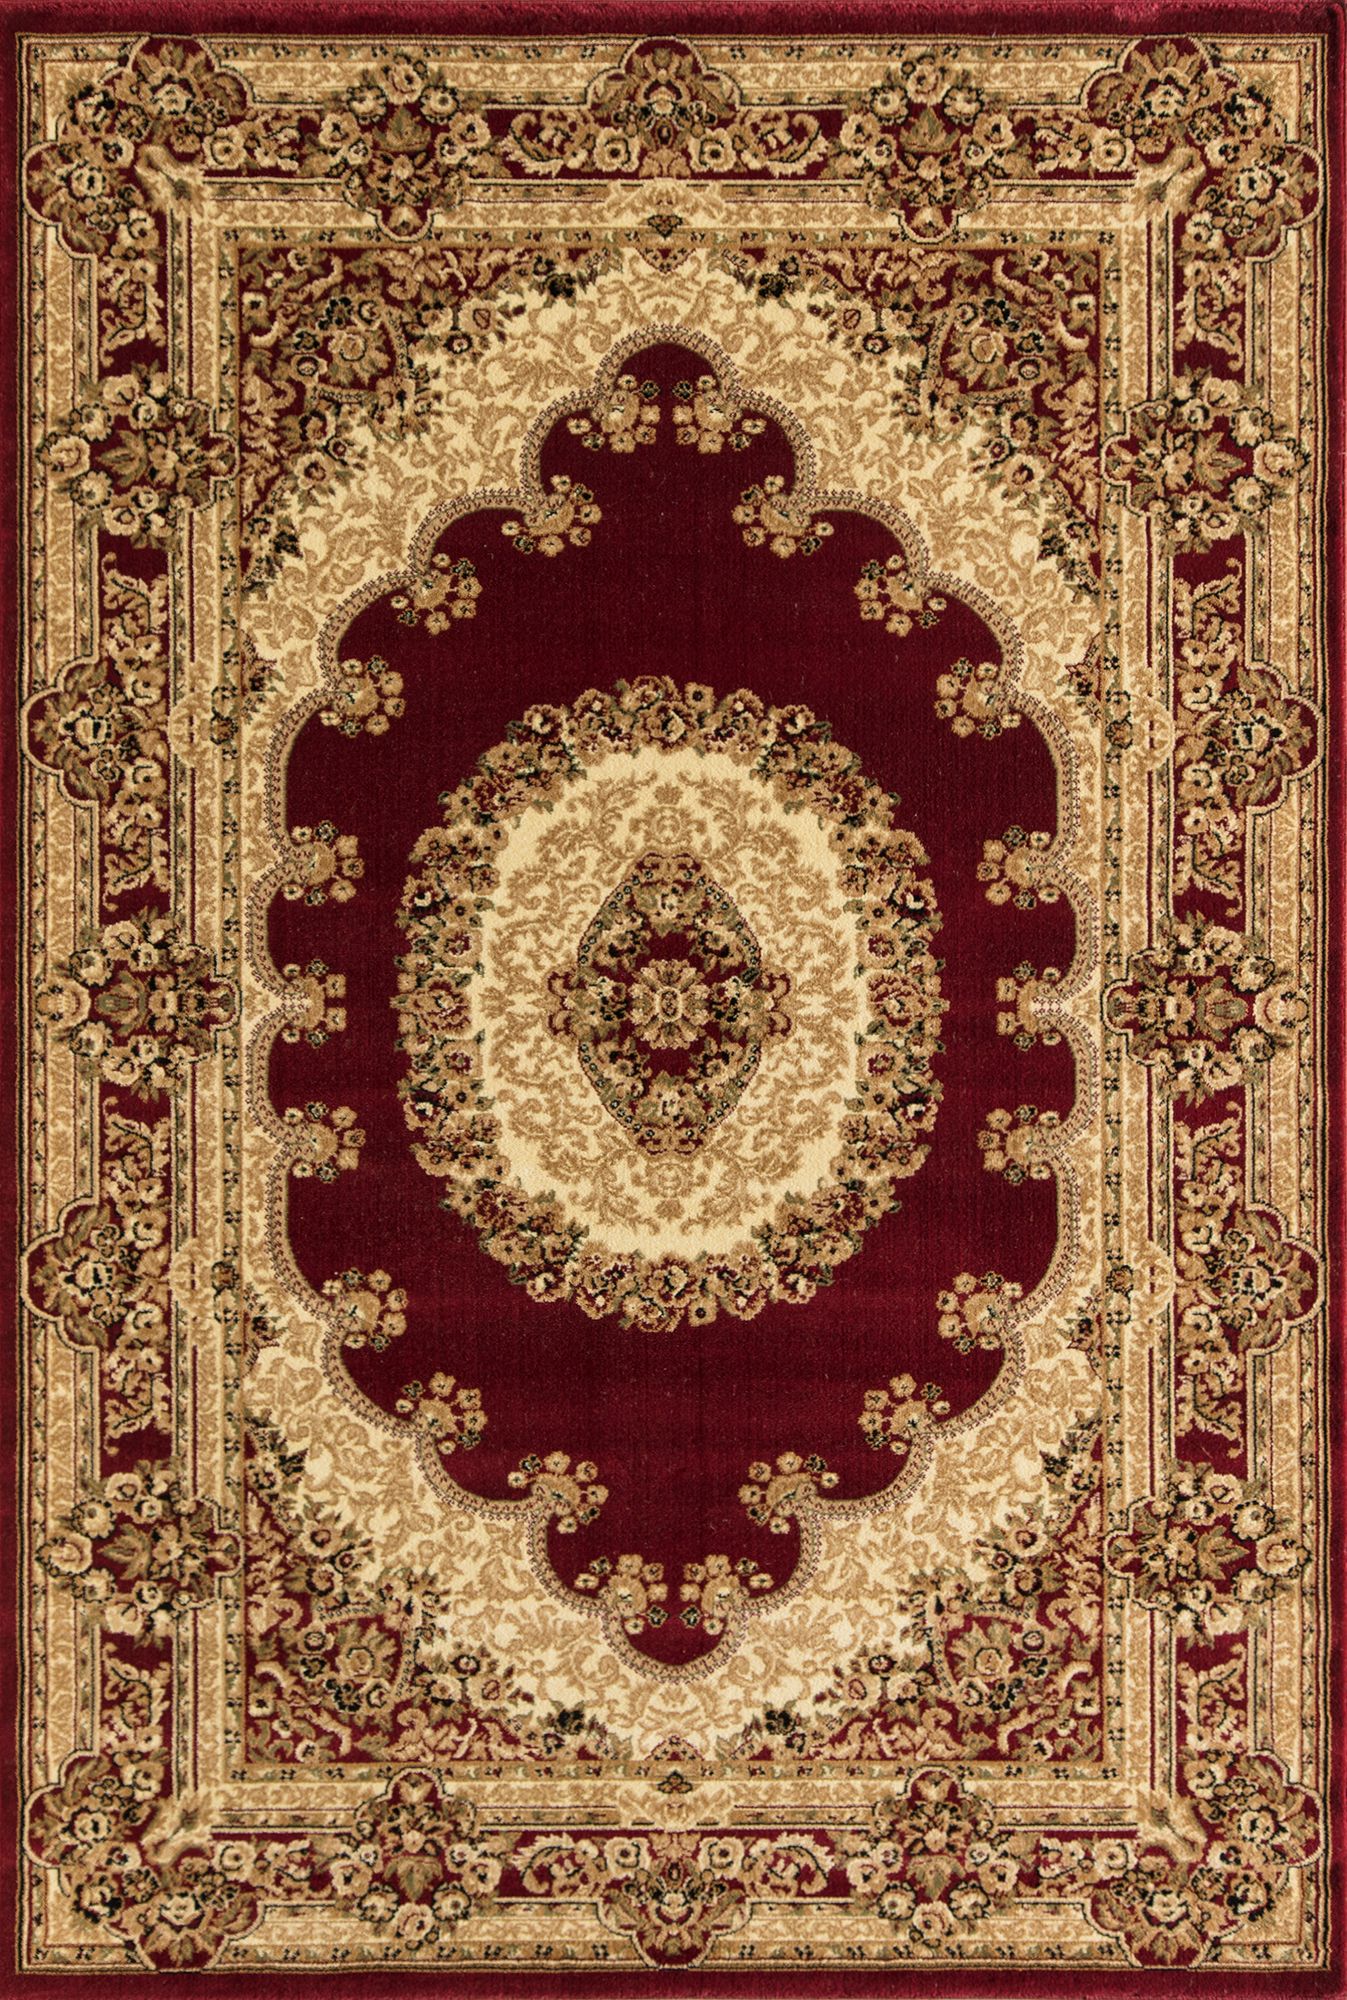 Rugs America Vista 807-RED Kerman Red Oriental Traditional Red Area Rug, 5'3"Round - image 2 of 3